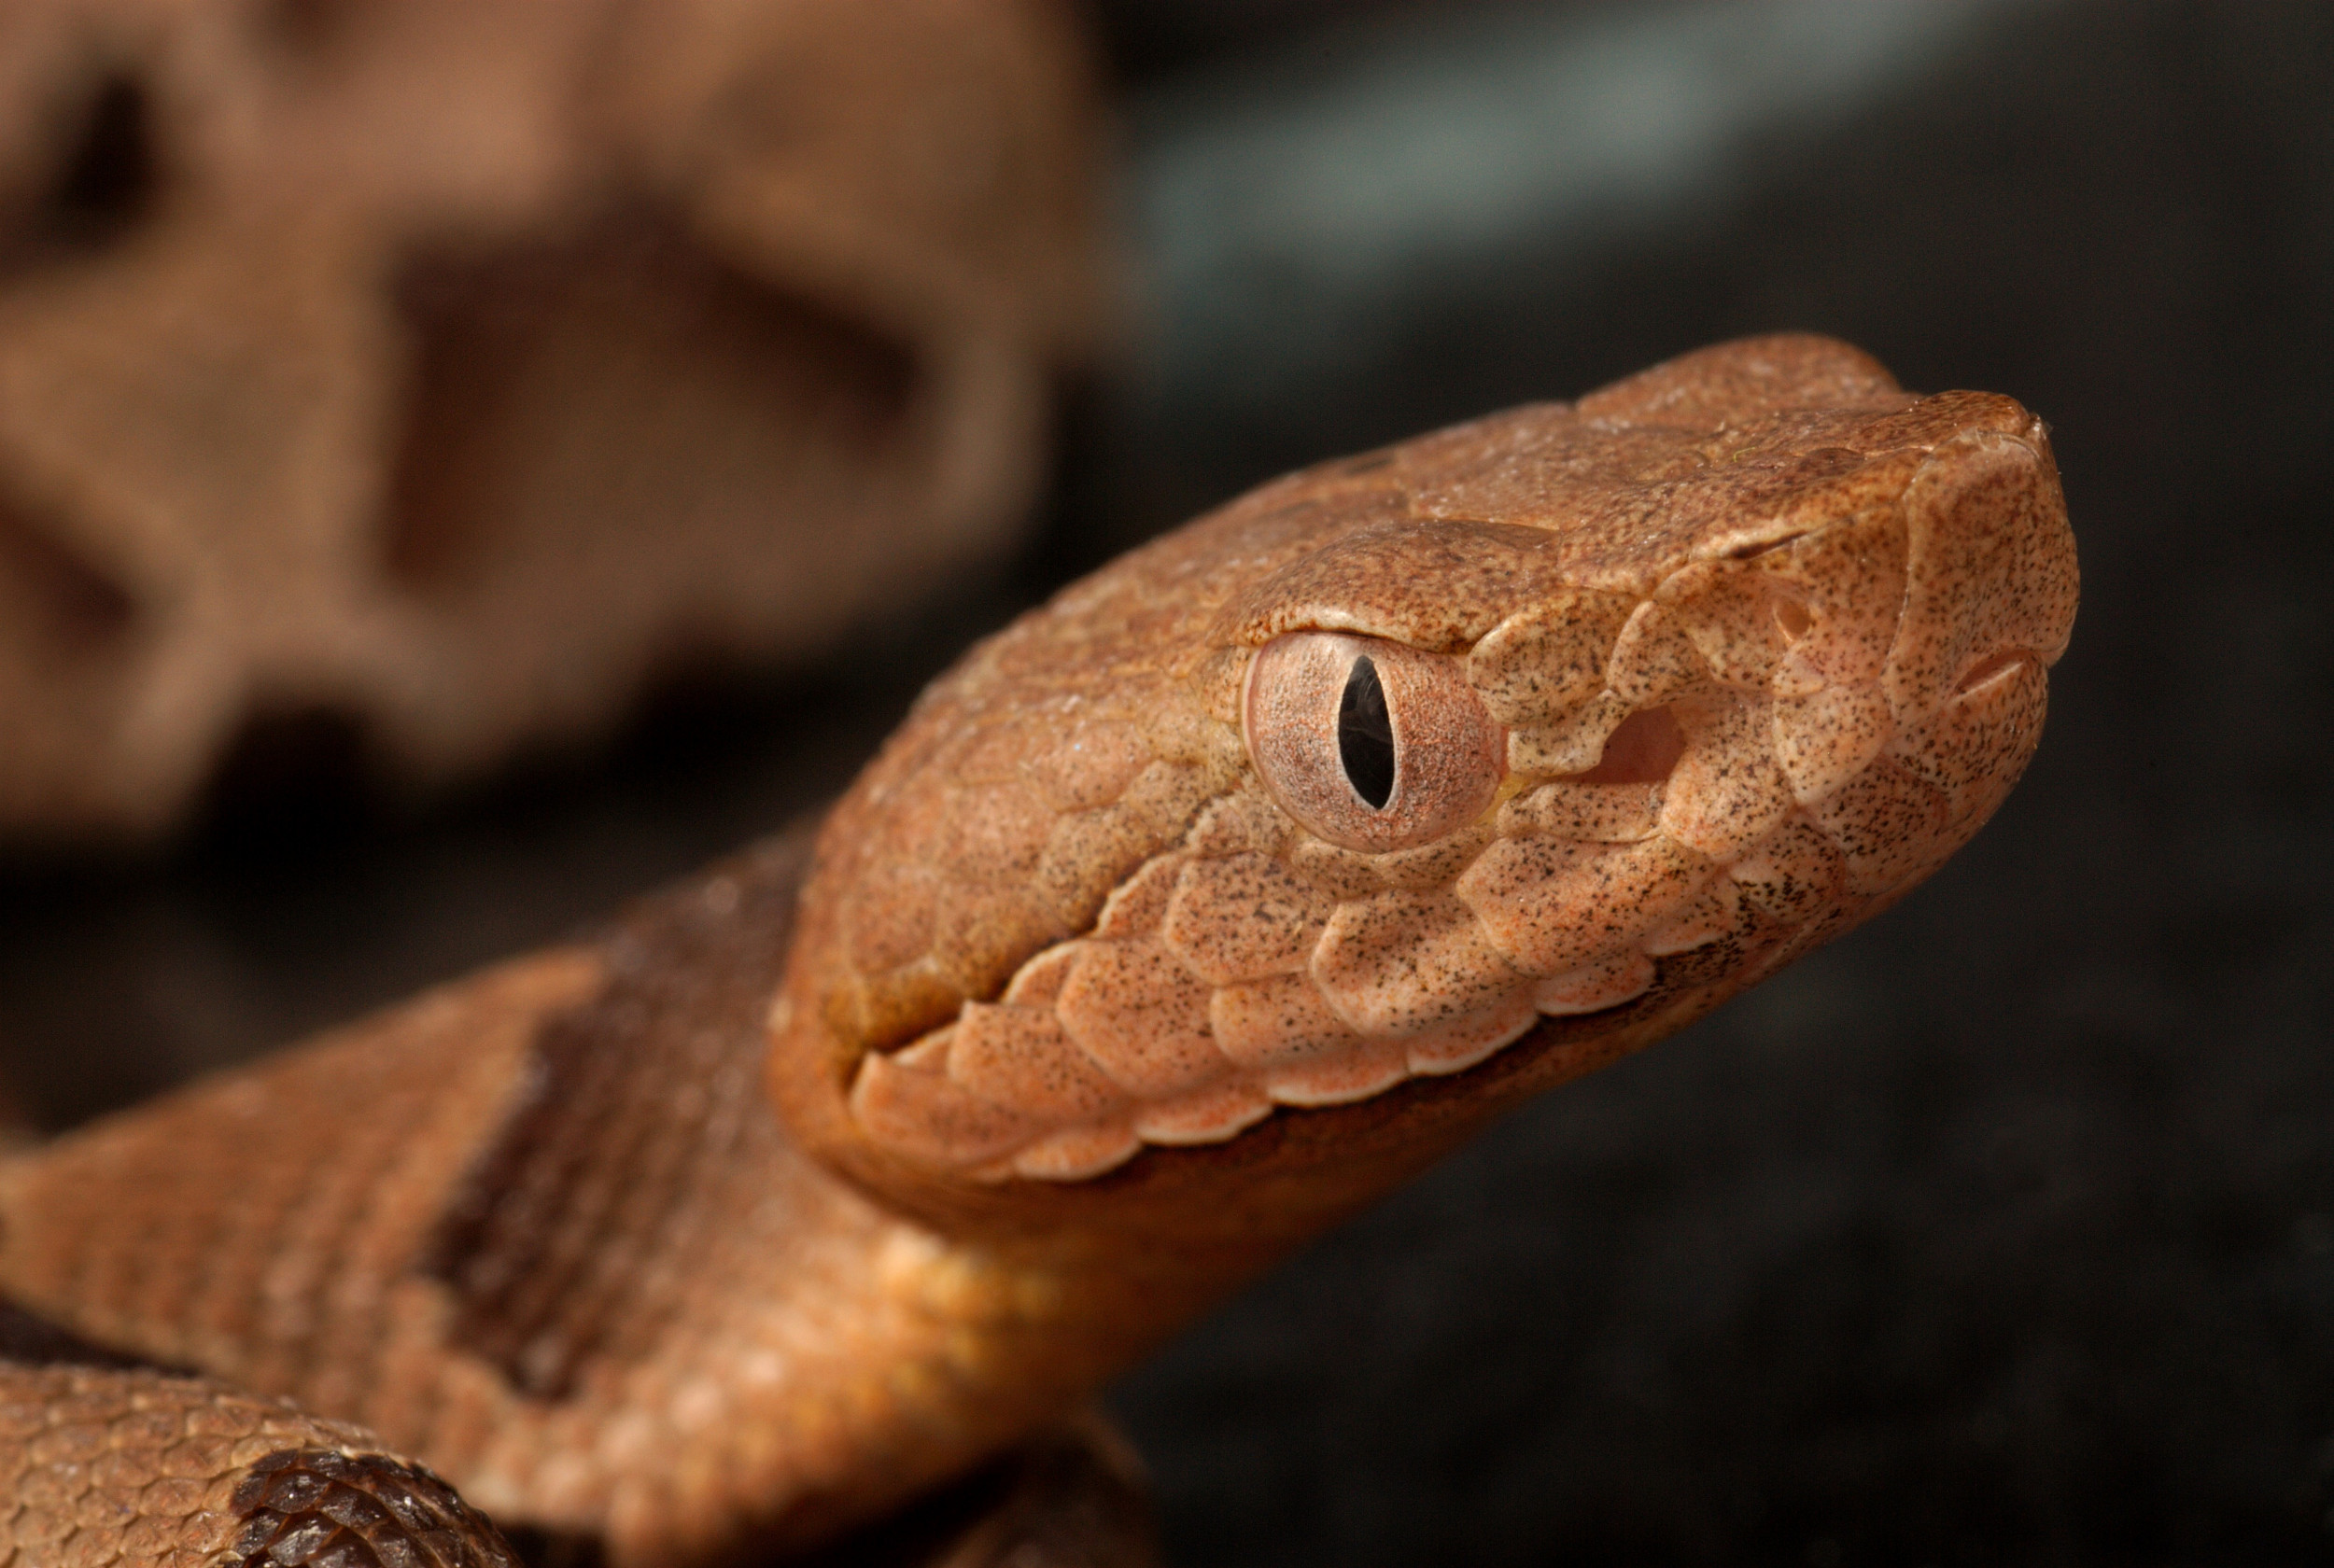 Venomous Copperhead Snake Bites 2-year-old in South Carolina Front Yard